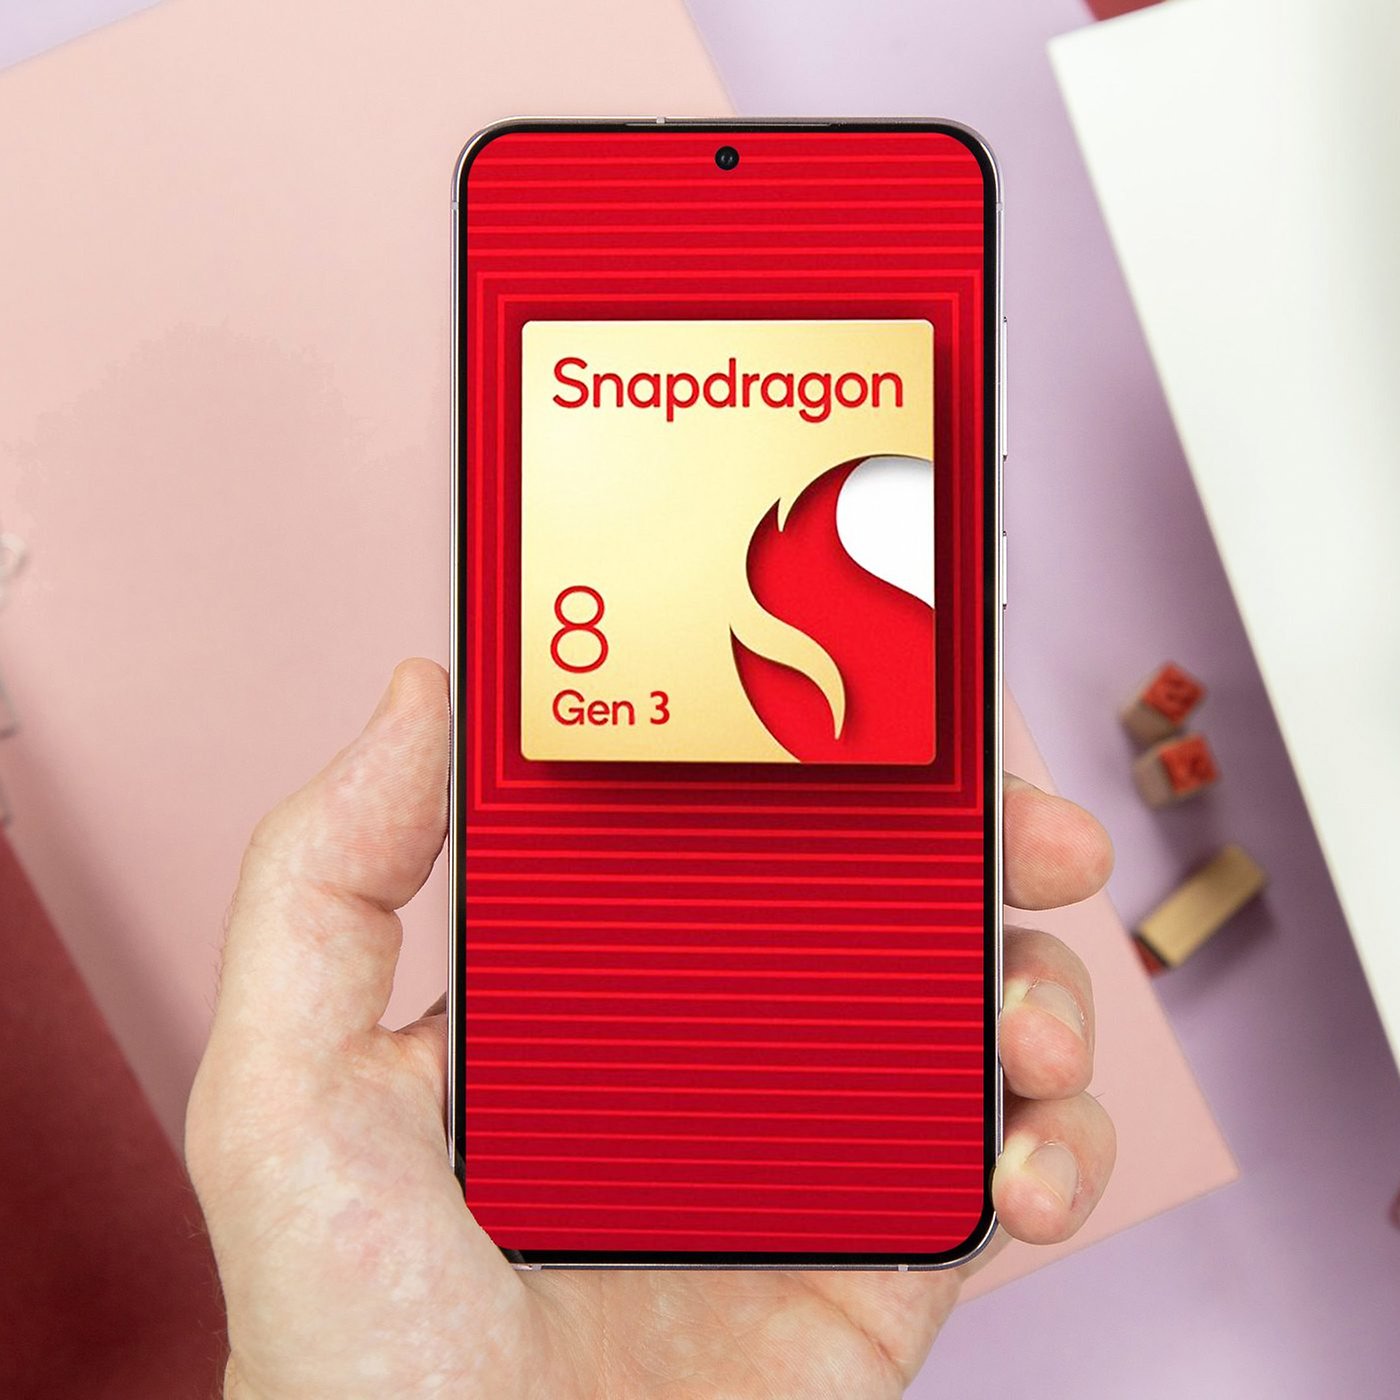 Qualcomm Goes All In on AI for Snapdragon 8 Gen 3 Mobile Processor